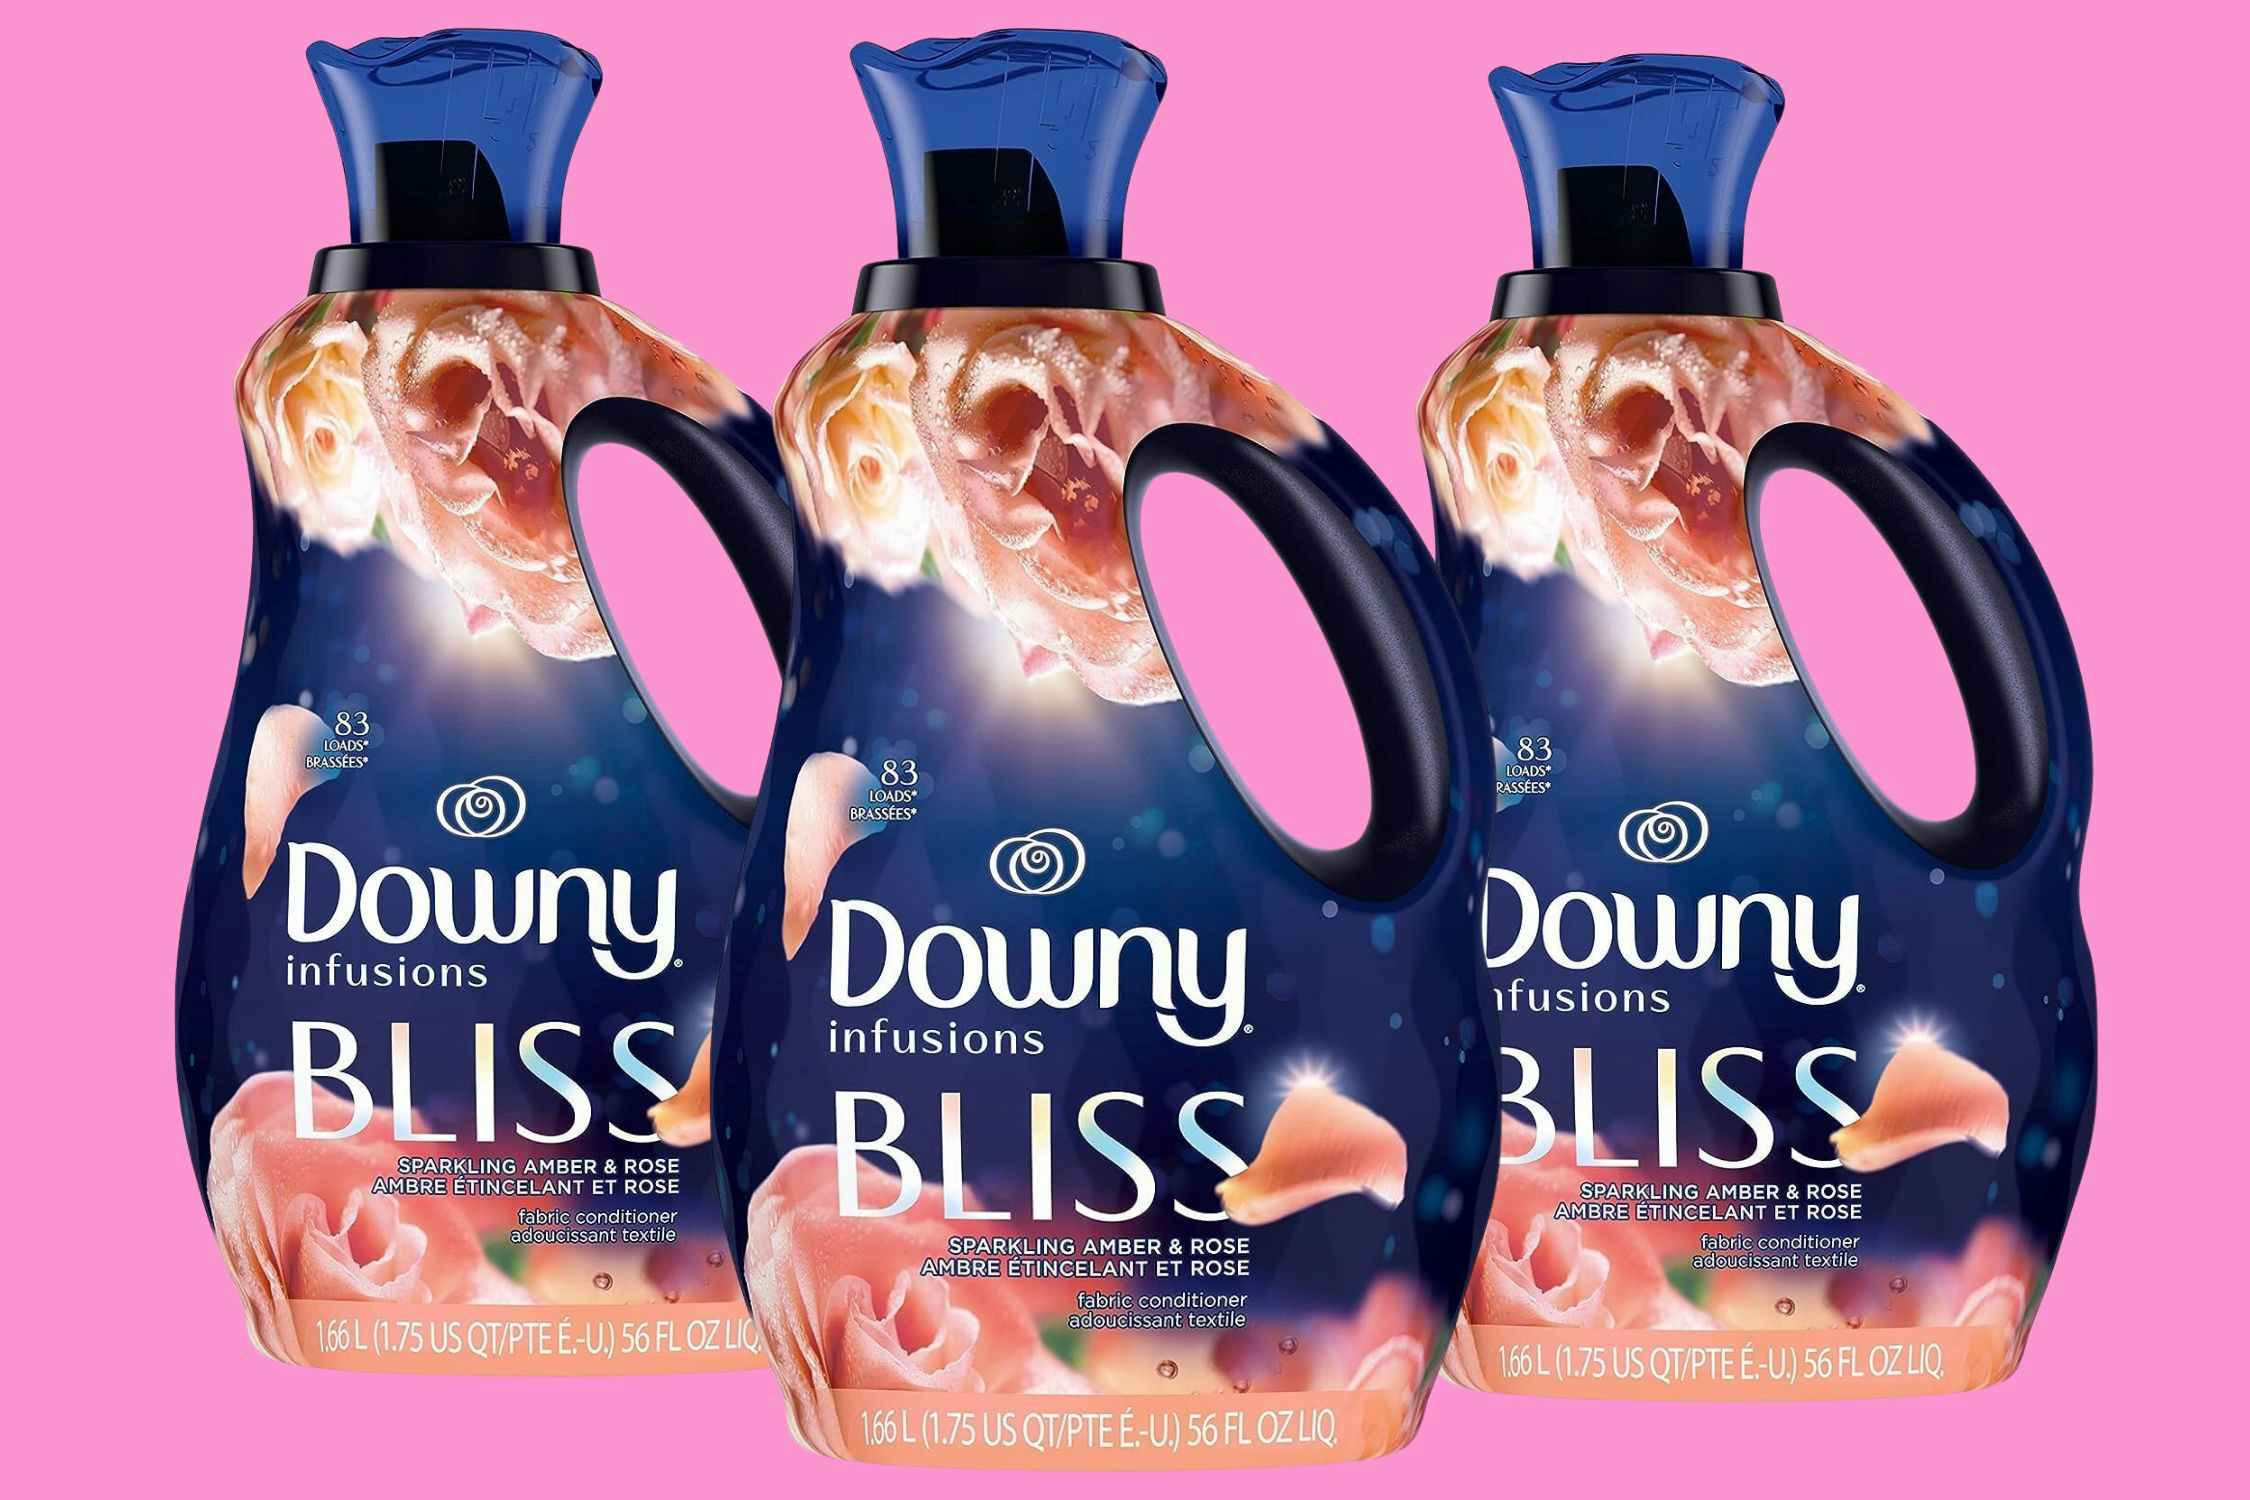 Downy Fabric Softener: Get 3 Bottles for as Low as $10.32 on Amazon